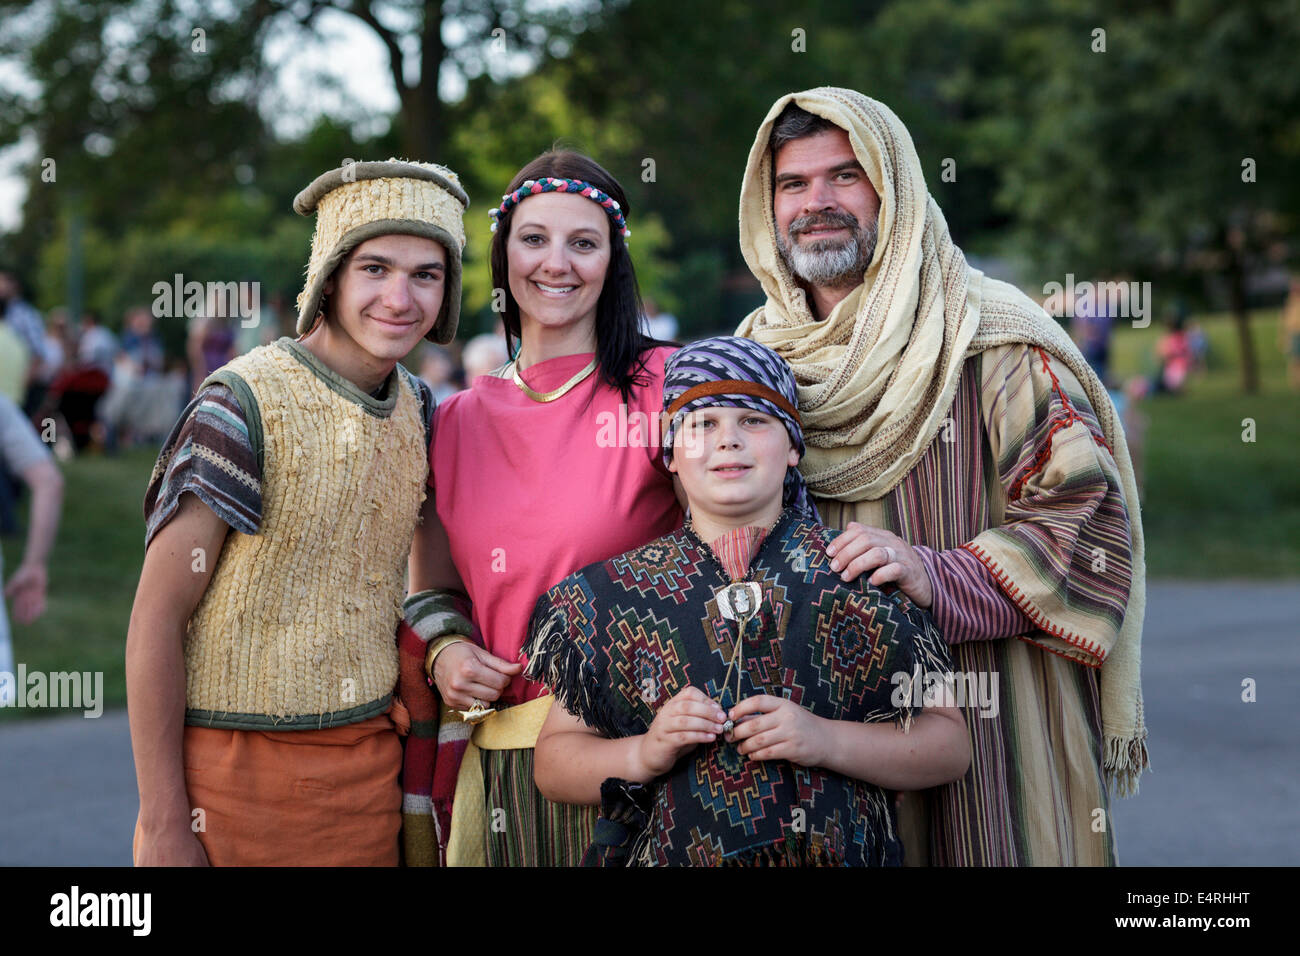 Mormons in costumes greet visitors to Hill Cumorah Pageant, Palmyra NY, which depicts Book of Mormon Stock Photo